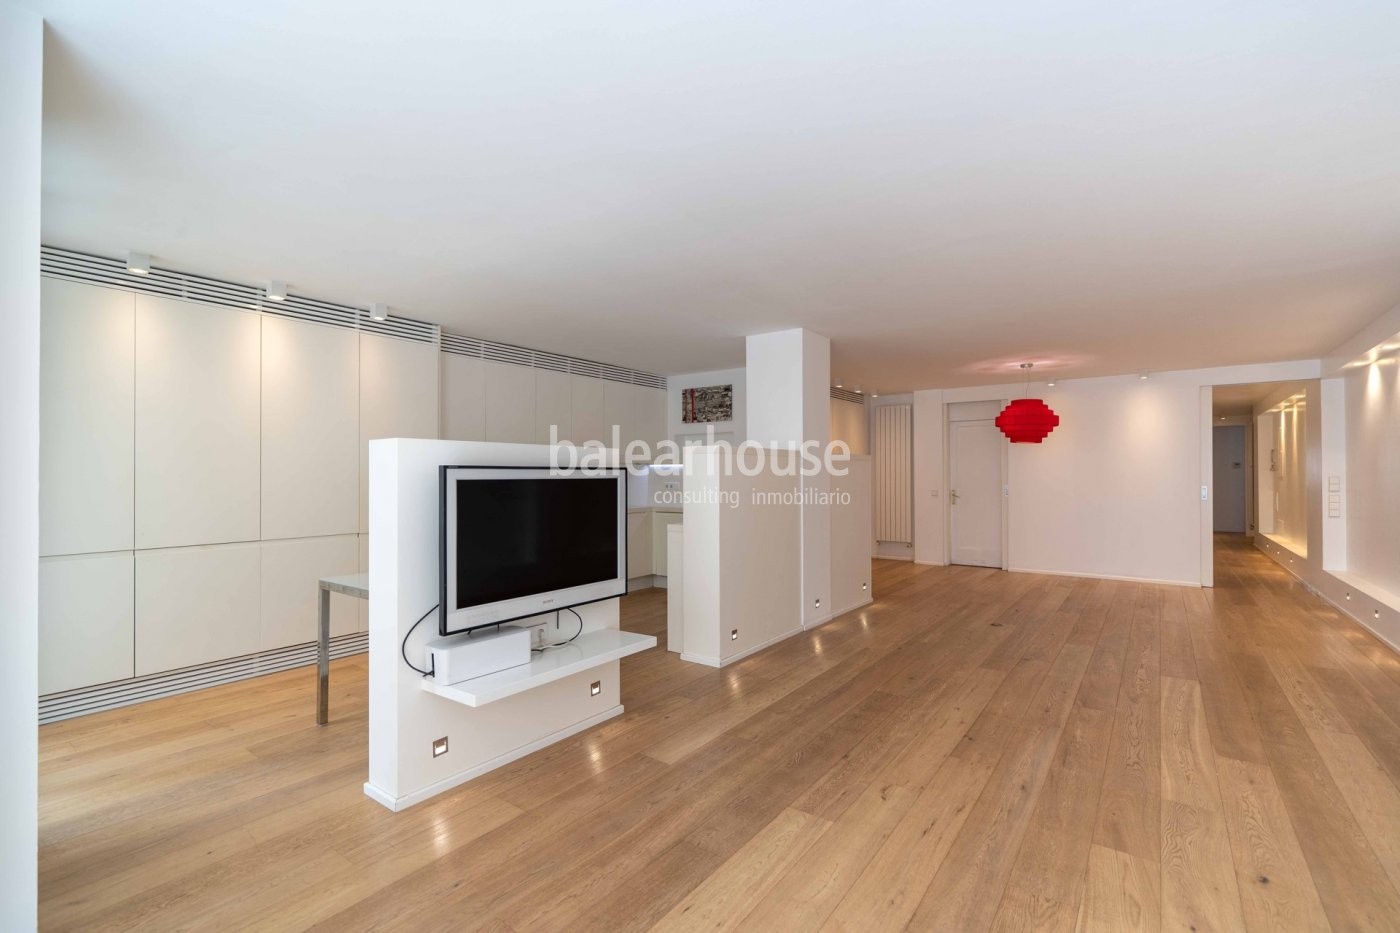 Contemporary style and comfort on offer at this spacious and comfortable central Palma apartment.